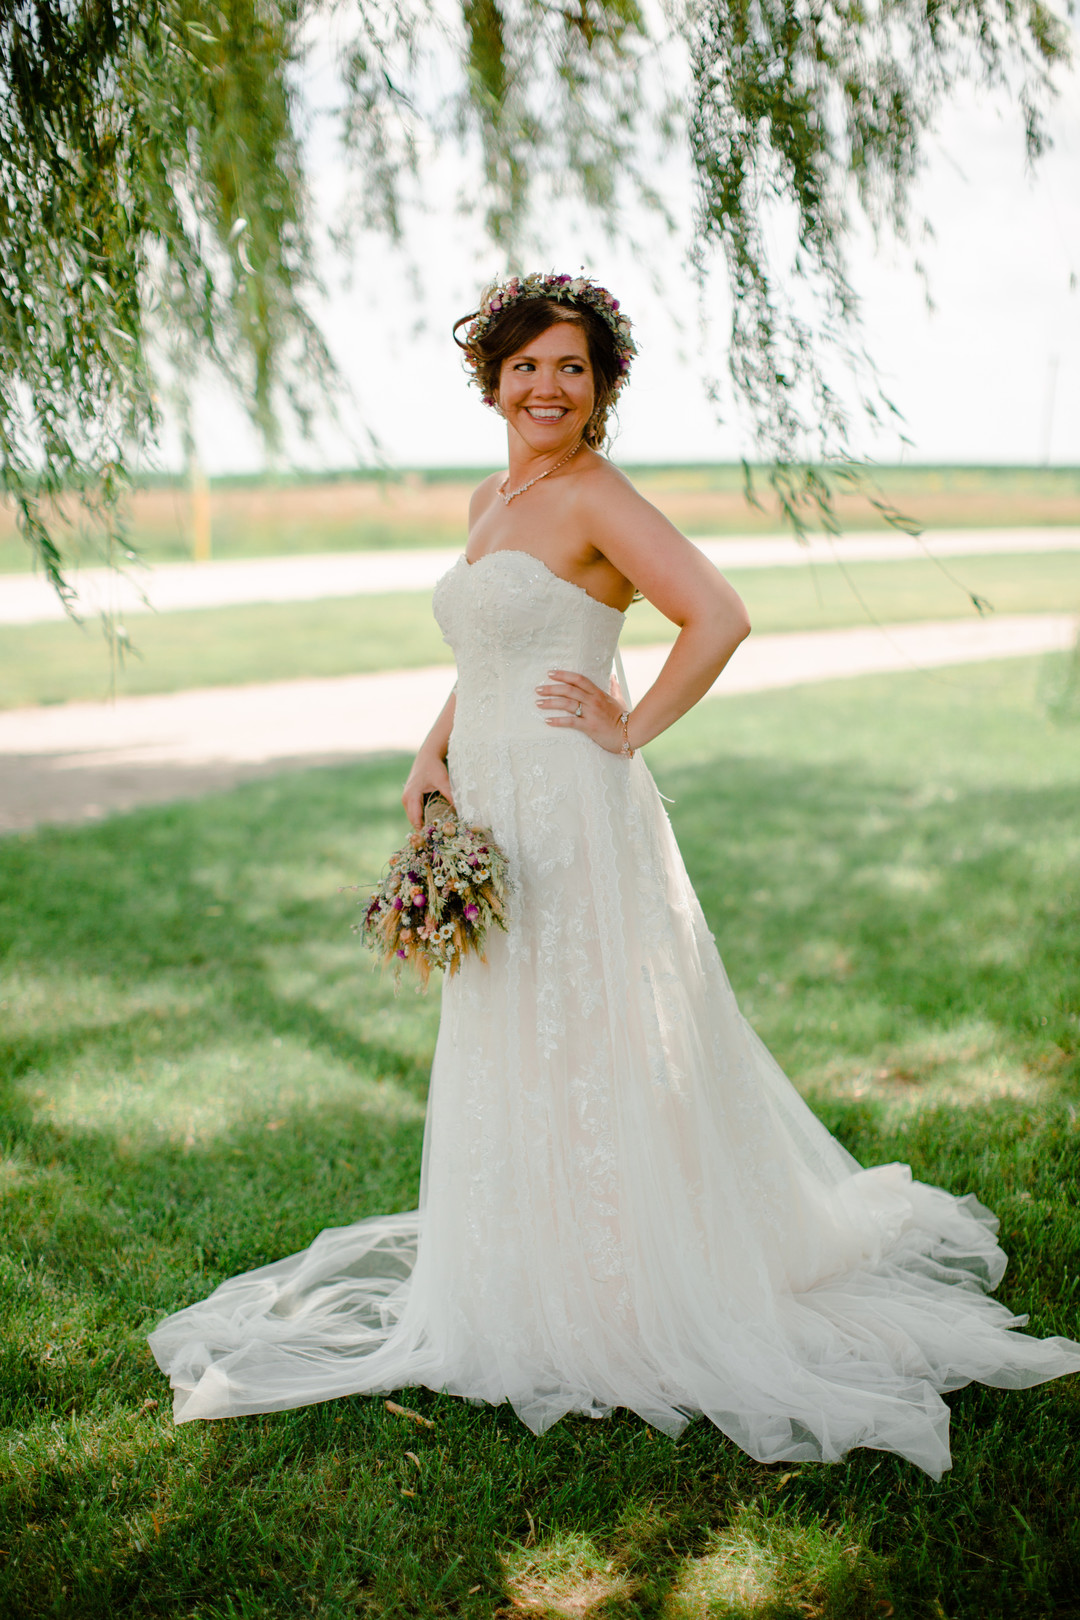 Bridal portrait: Rustic country wedding in Minooka, IL captured by Katie Brsan Photography. Visit CHItheeWED.com for more wedding inspiration!